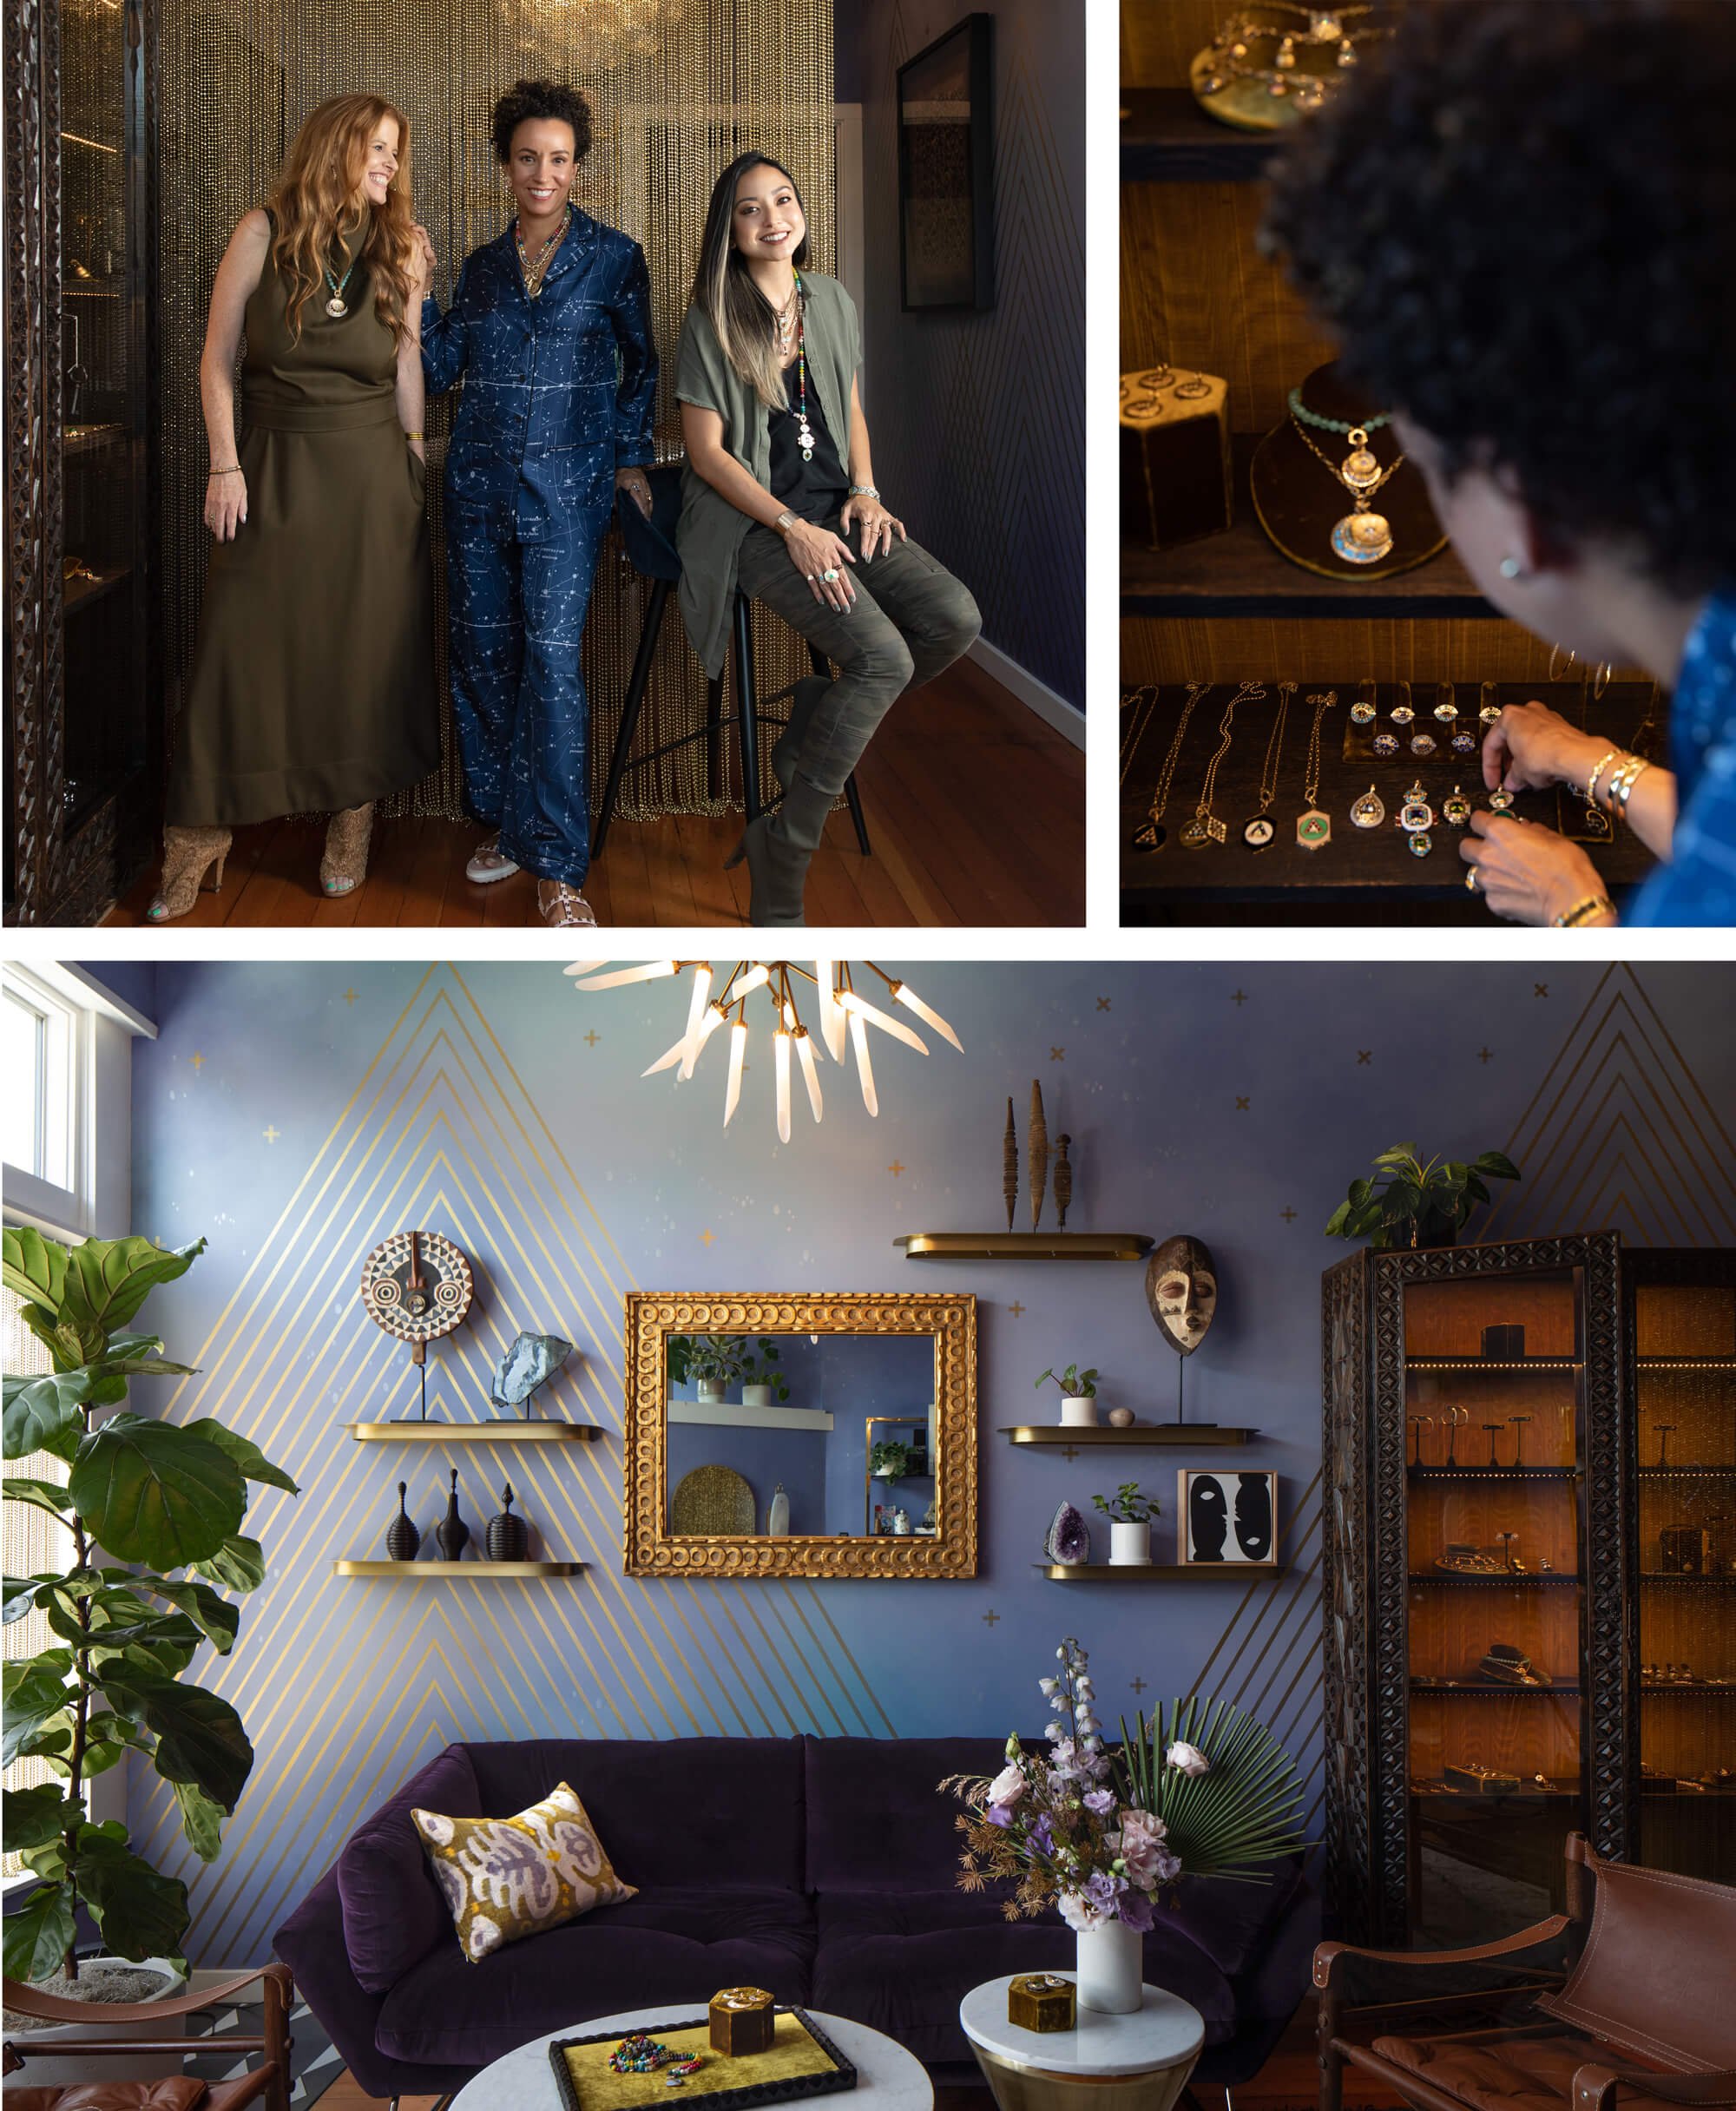 Three images: On left, three stylish smiling women. On right a jewelry display as seen over the shoulder of one of the women. Below is a cozy room with collections a sculptural couch and accessories.